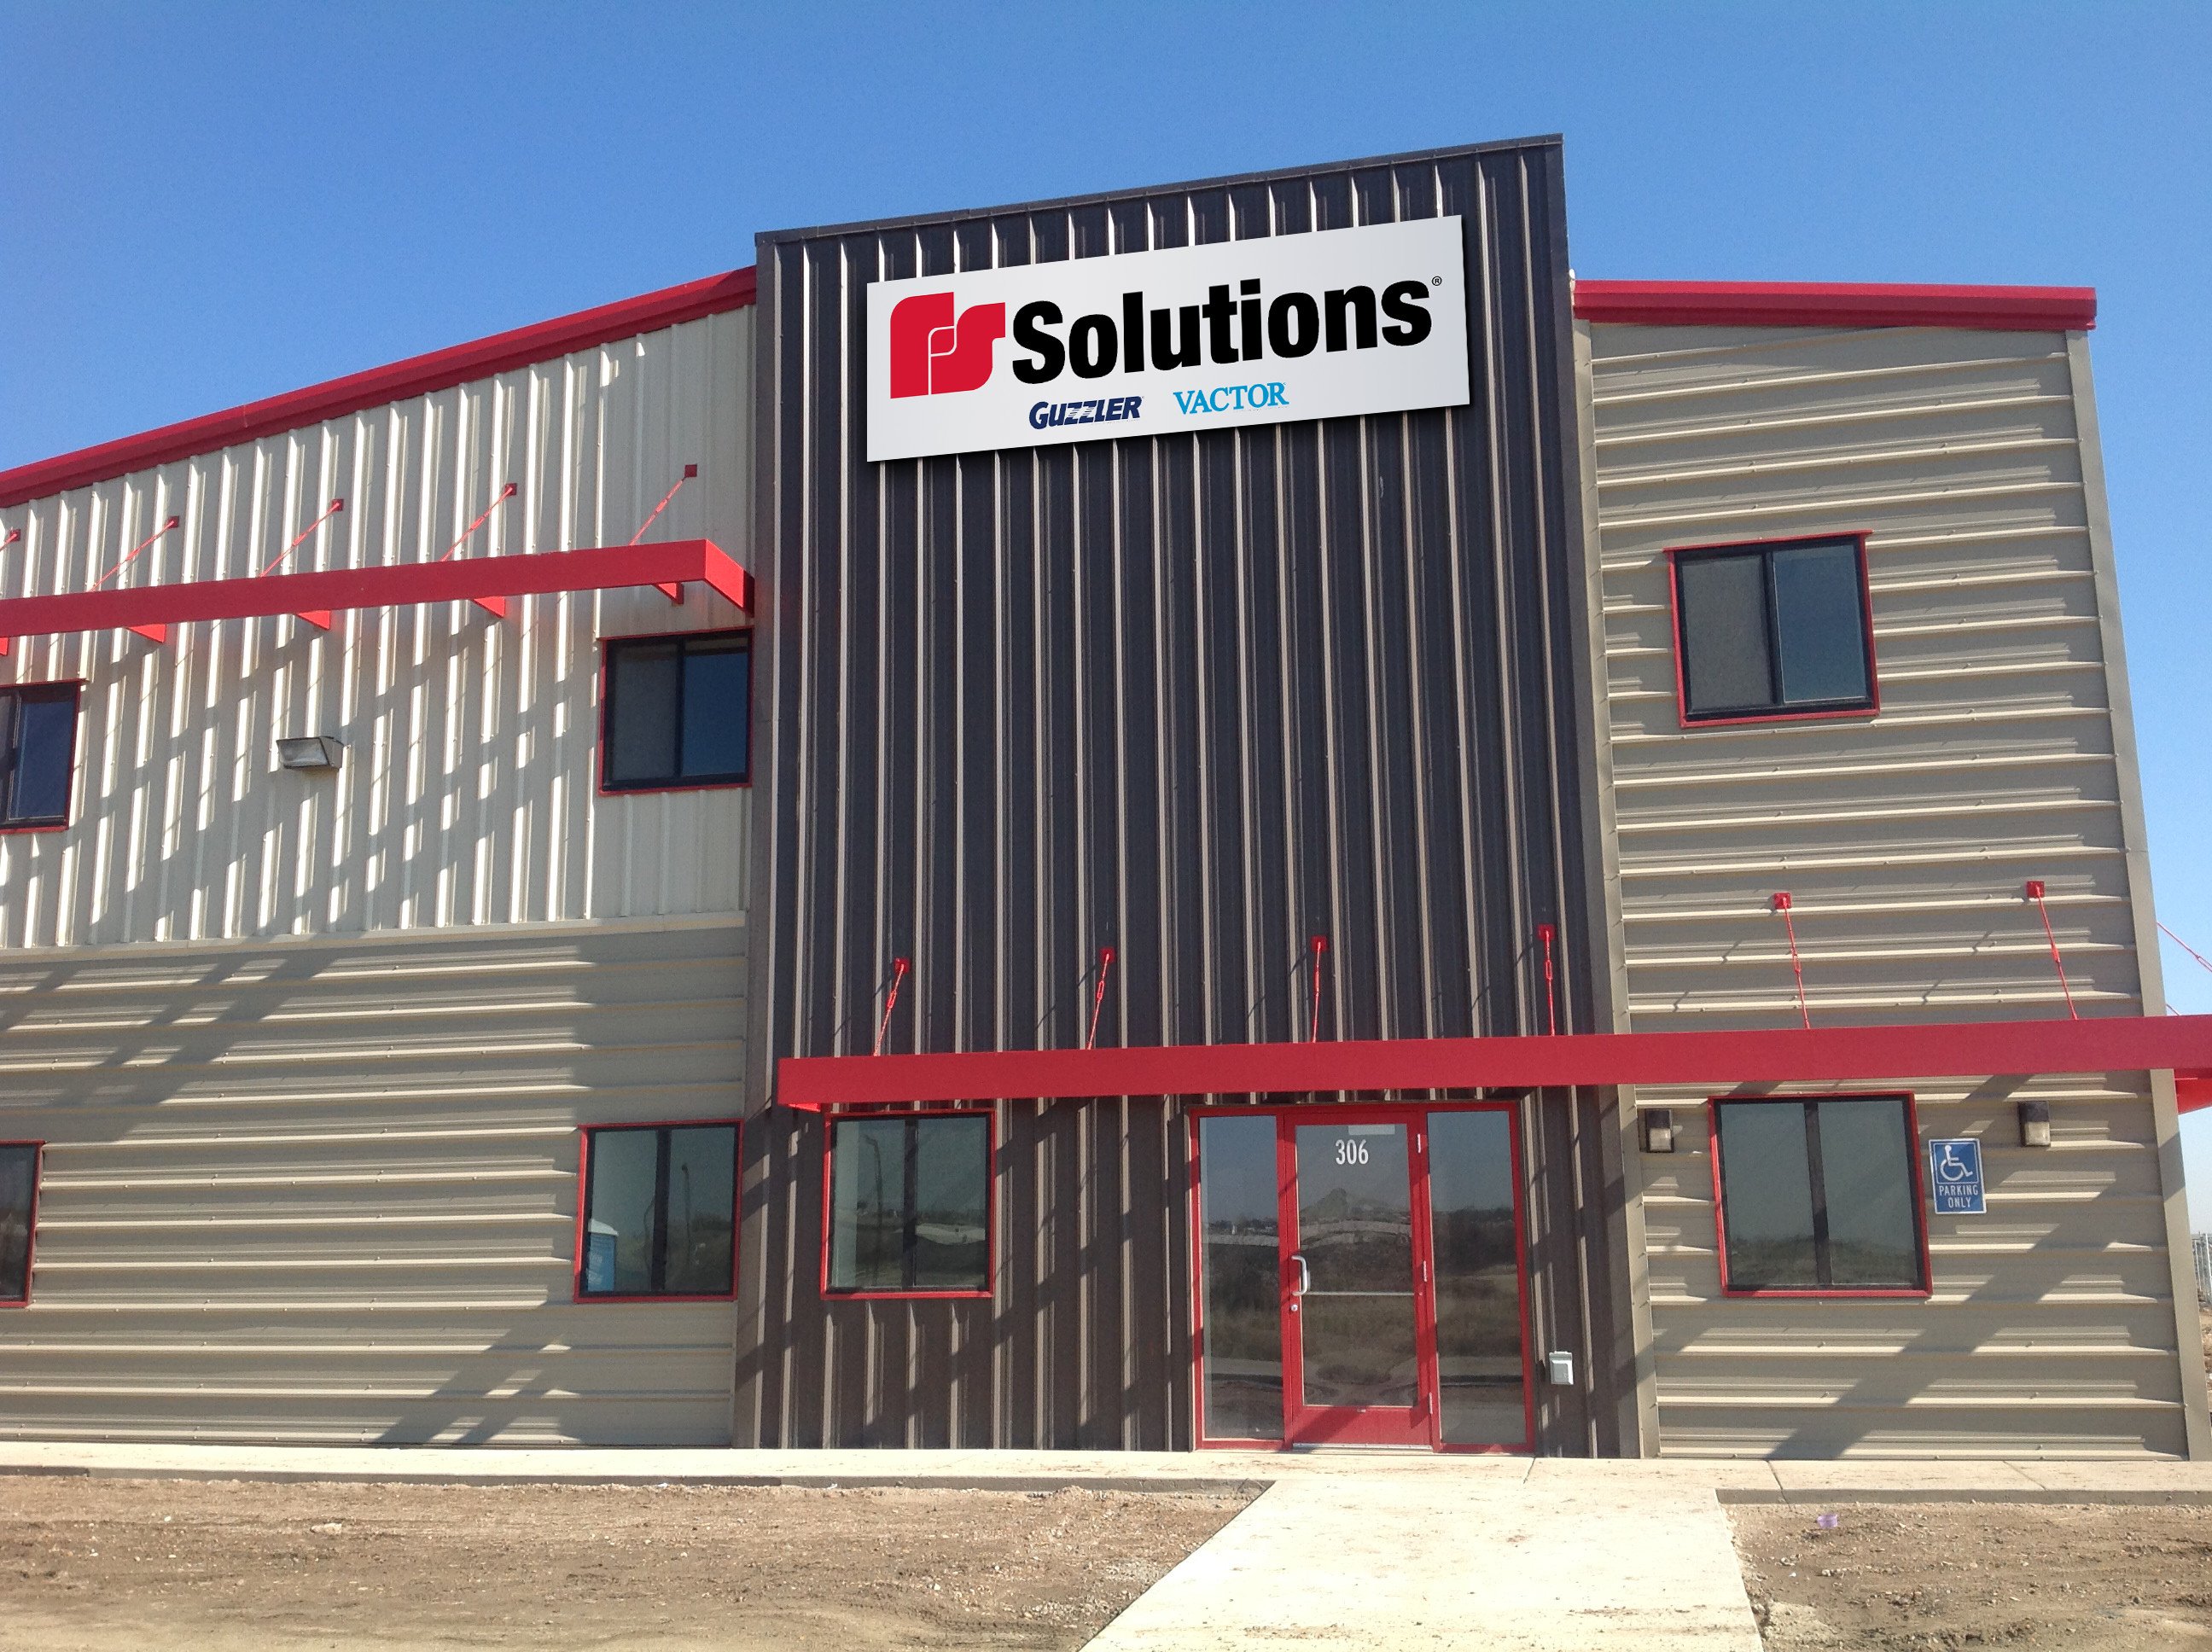 FS Solutions Opens 11th Location in Williston, N.D.